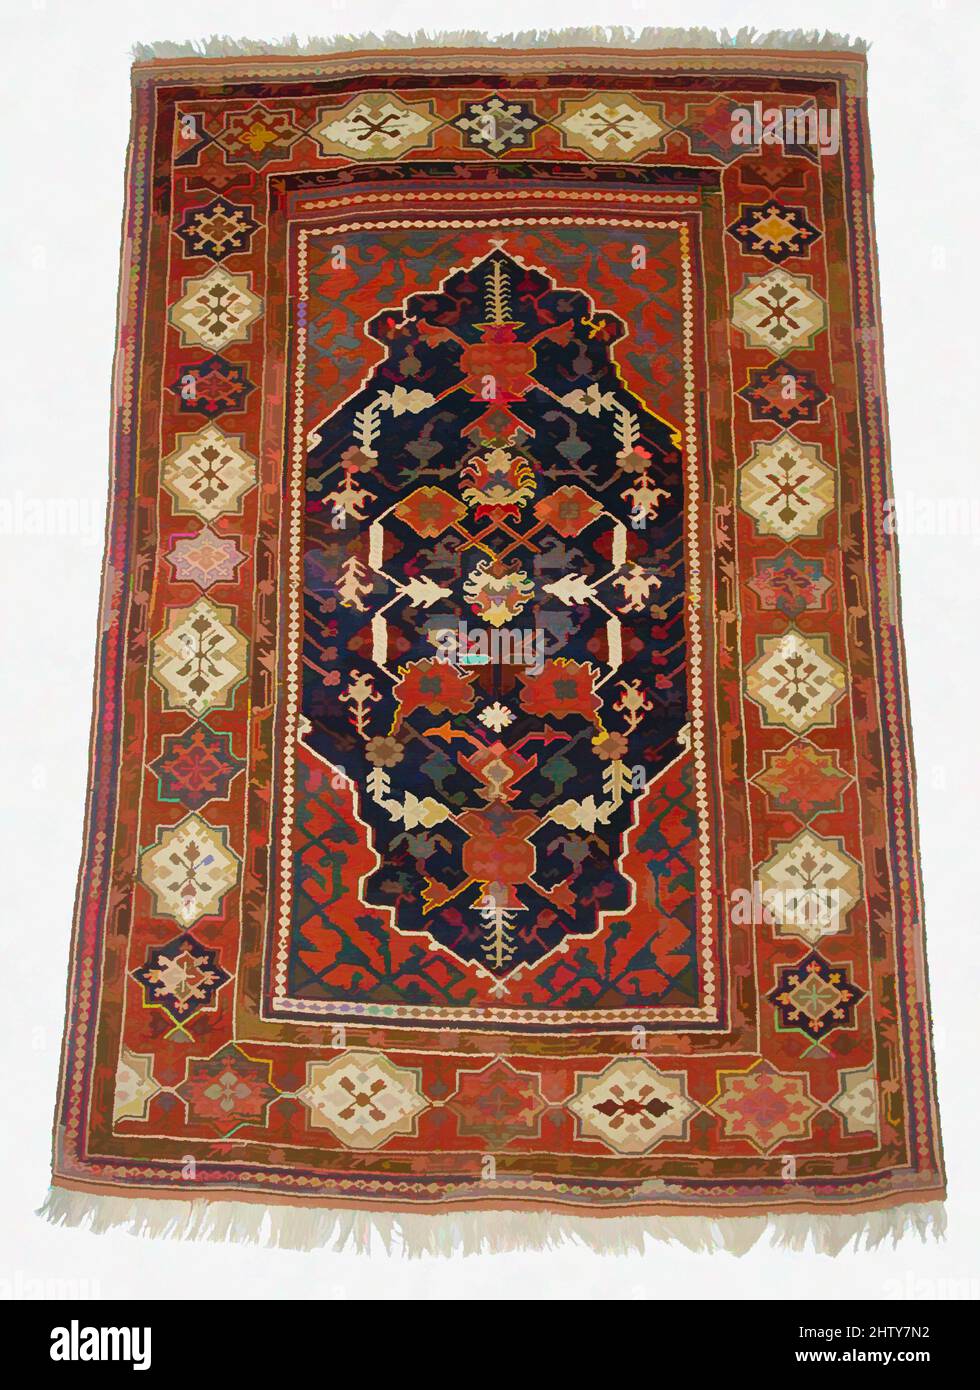 Art inspired by Transylvanian' Carpet, probably 17th century, Attributed to Turkey, Wool (warp, weft and pile); symmetrically knotted pile, H. 77 1/2 in. (196.9 cm), Textiles-Rugs, Large numbers of western Anatolian carpets such as this one were imported into Europe during the, Classic works modernized by Artotop with a splash of modernity. Shapes, color and value, eye-catching visual impact on art. Emotions through freedom of artworks in a contemporary way. A timeless message pursuing a wildly creative new direction. Artists turning to the digital medium and creating the Artotop NFT Stock Photo